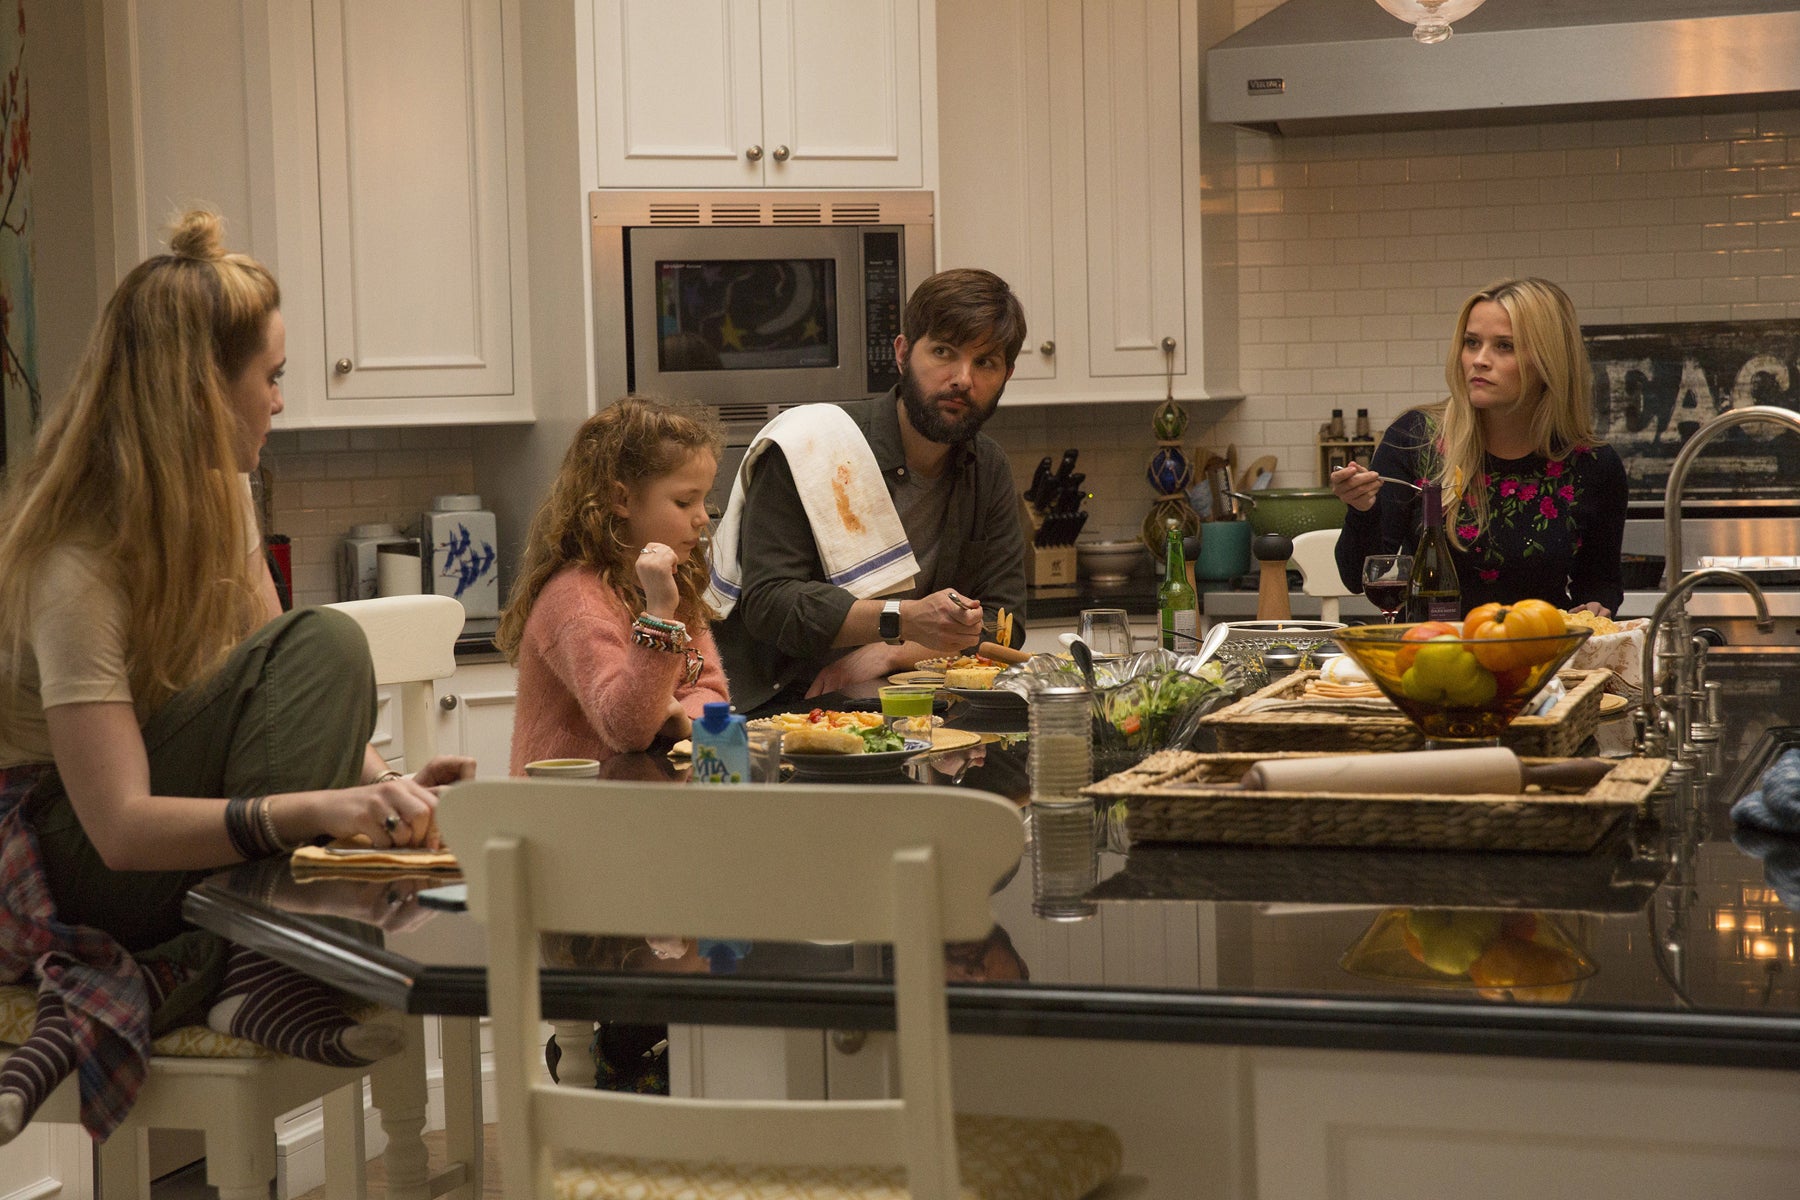 Madeline and Ed (Adam Scott) prepare dinner in the kitchen for their daughters, Abigail (Kathryn Newton) and Chloe (Darby Camp).